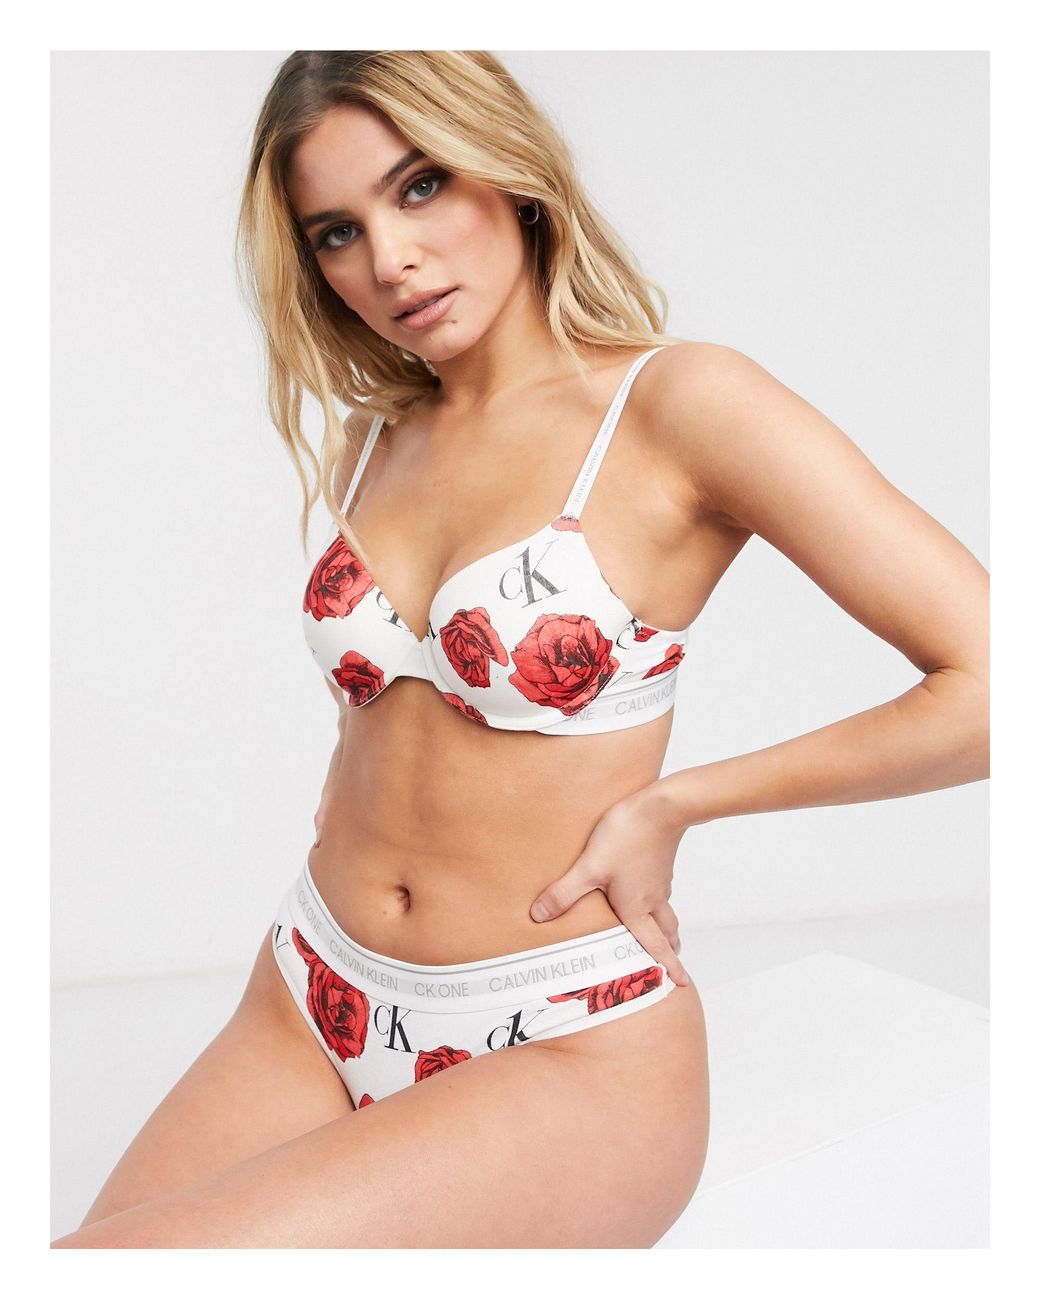 Calvin Klein Ck One Cotton Lightly Lined Floral Roses Bra in White